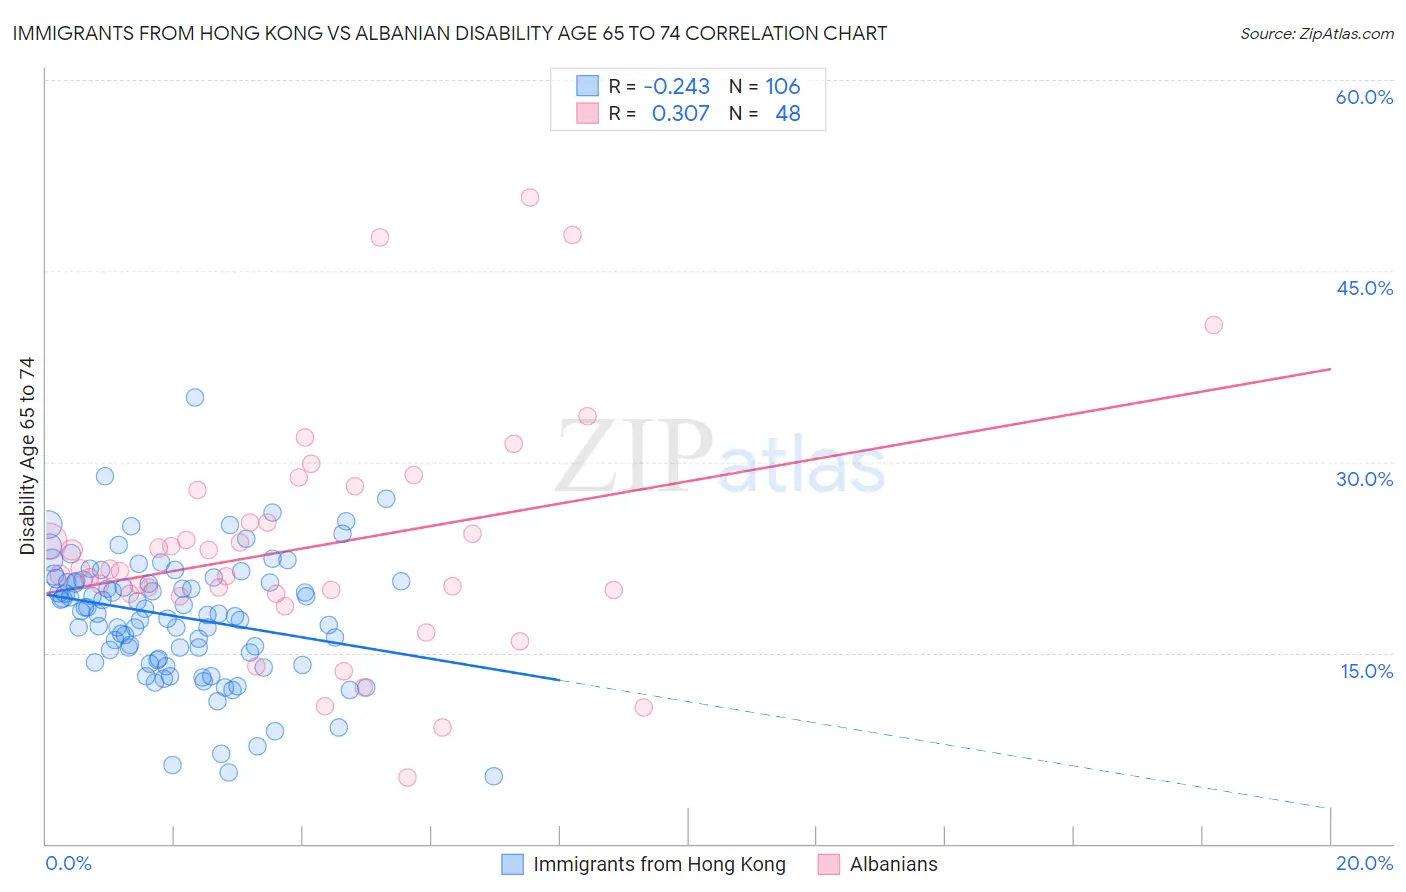 Immigrants from Hong Kong vs Albanian Disability Age 65 to 74